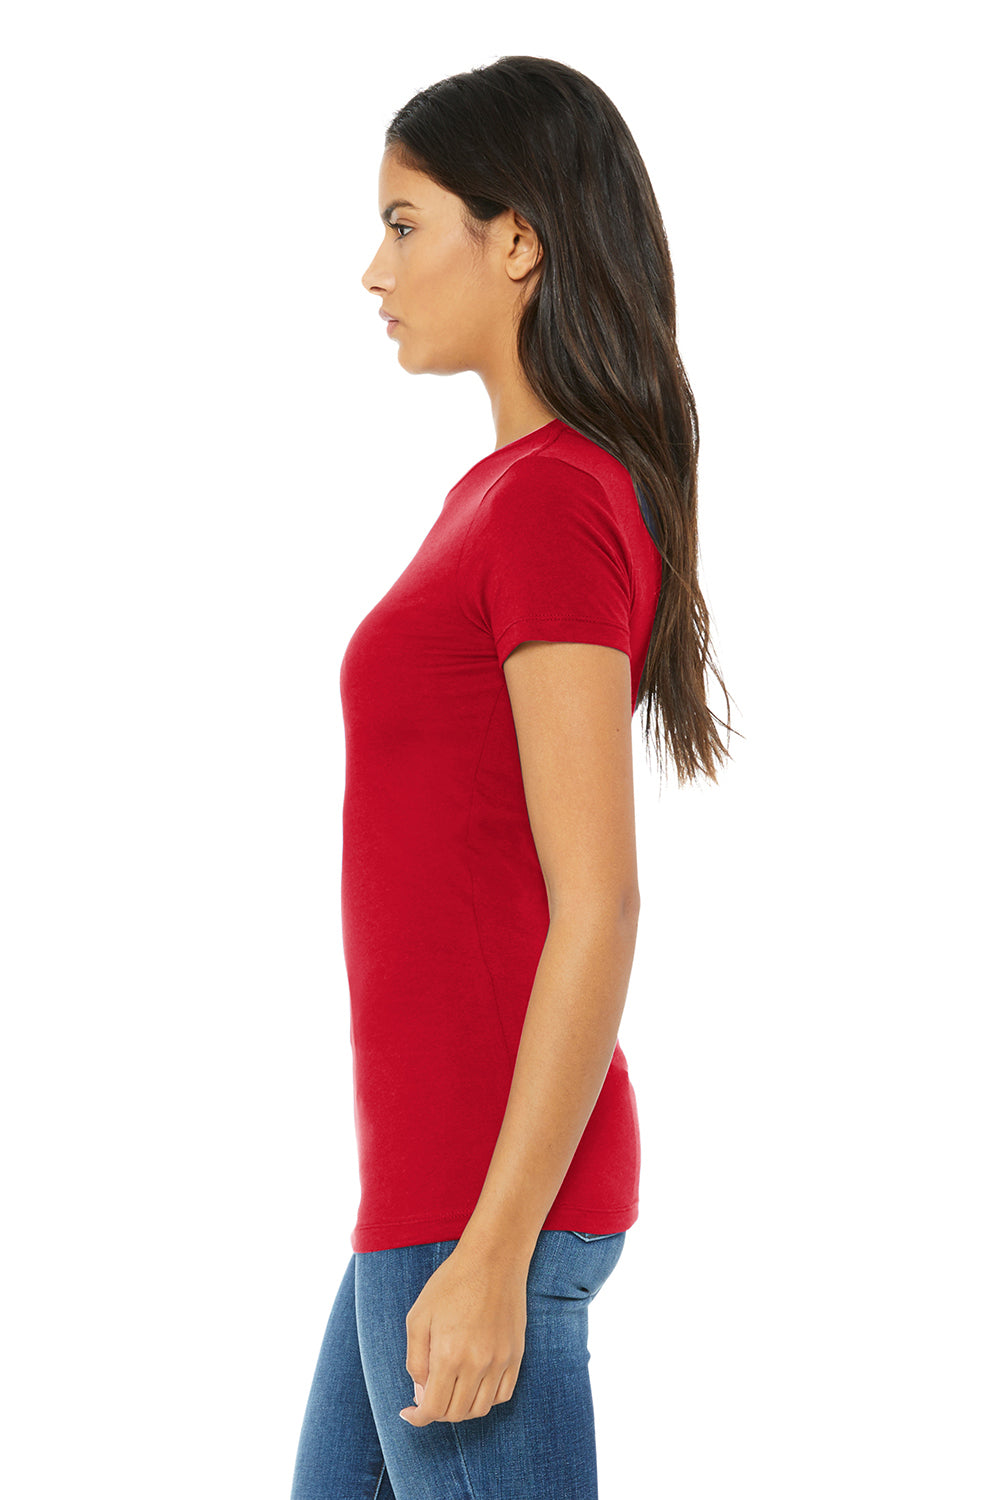 Bella + Canvas BC6004/6004 Womens The Favorite Short Sleeve Crewneck T-Shirt Red Model Side